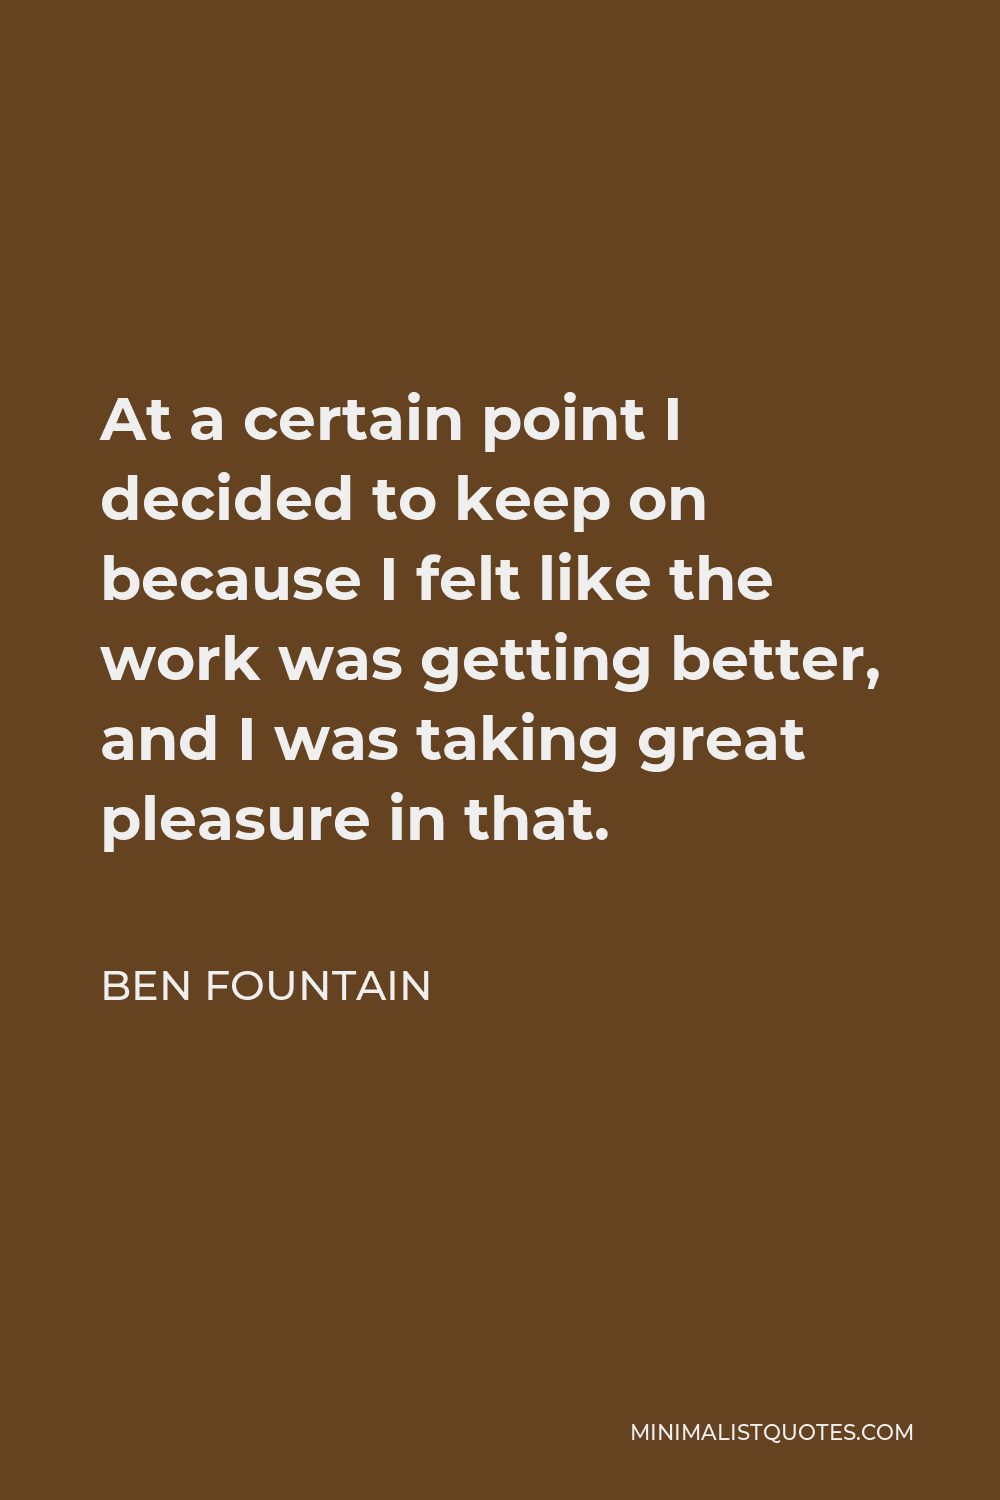 Ben Fountain Quote - At a certain point I decided to keep on because I felt like the work was getting better, and I was taking great pleasure in that.